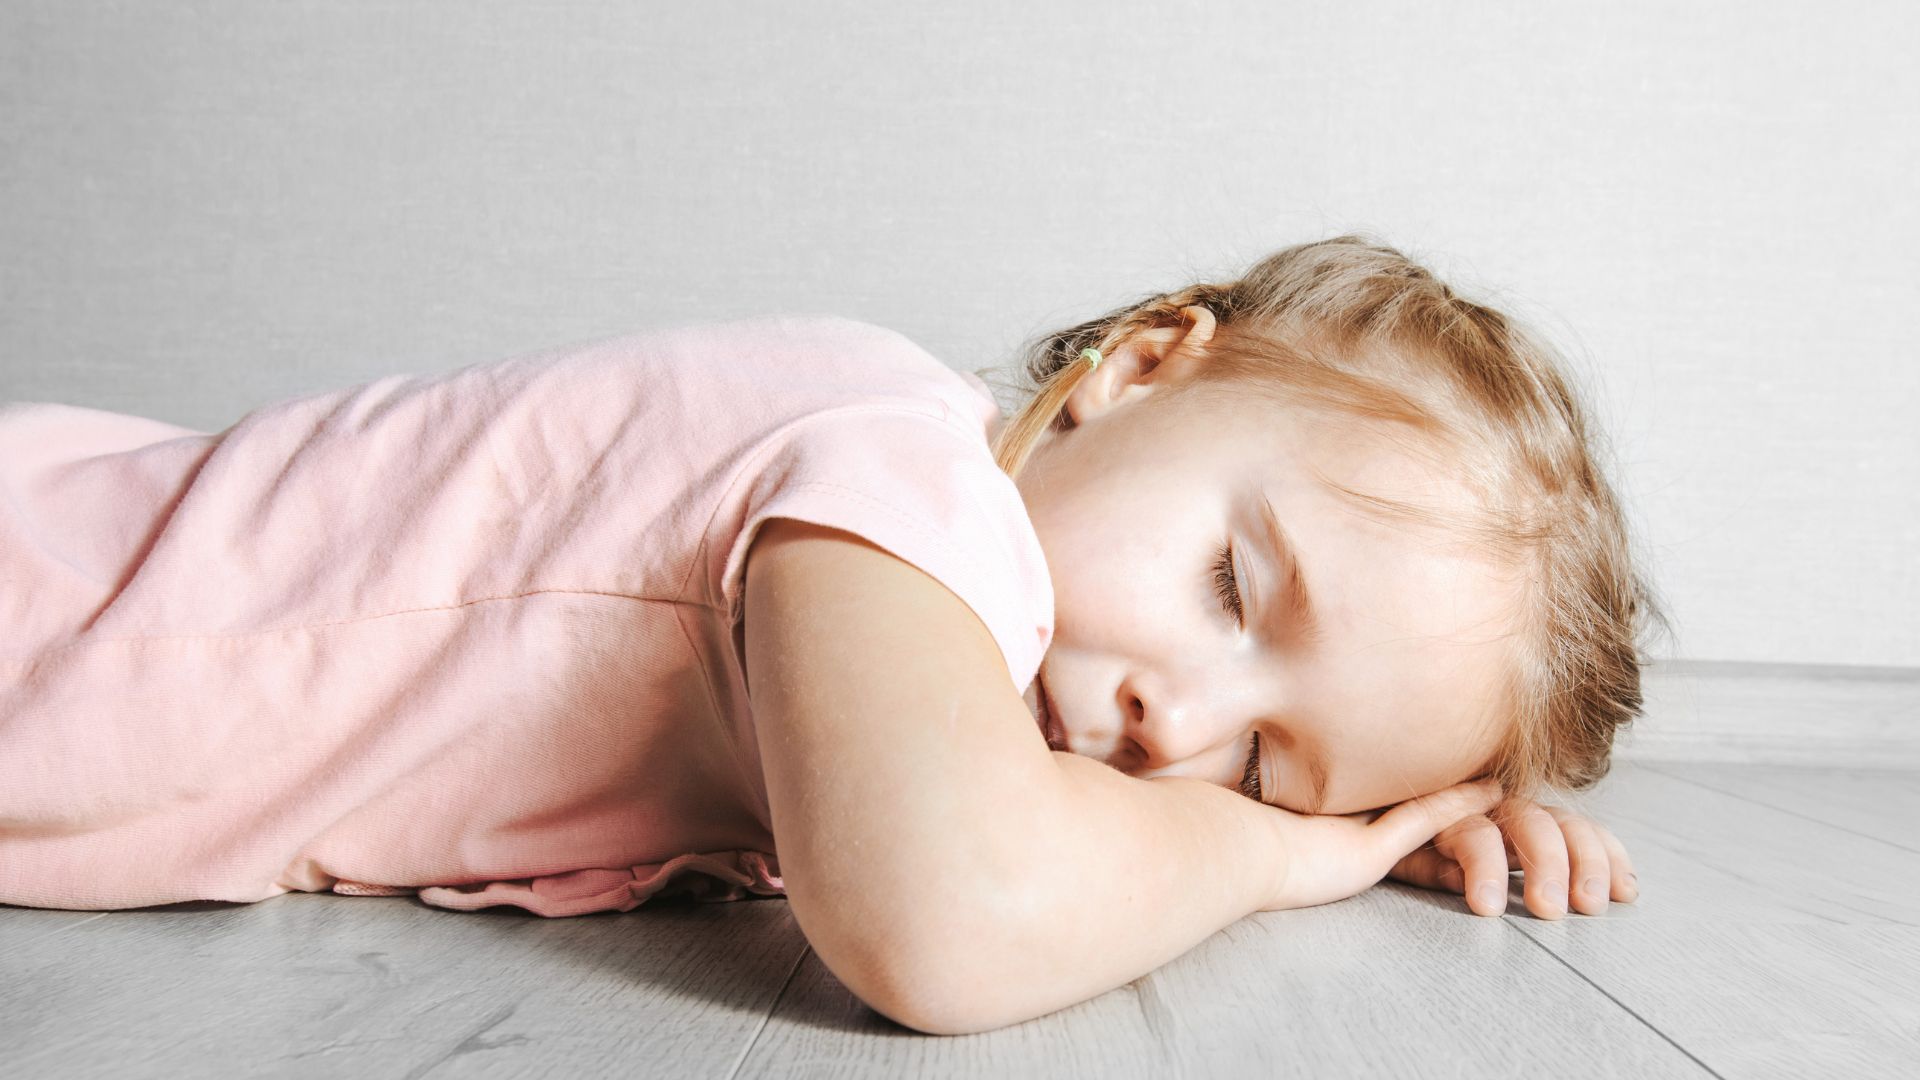 Therapist Dilemma: What To Do When A Child Falls Asleep In Session